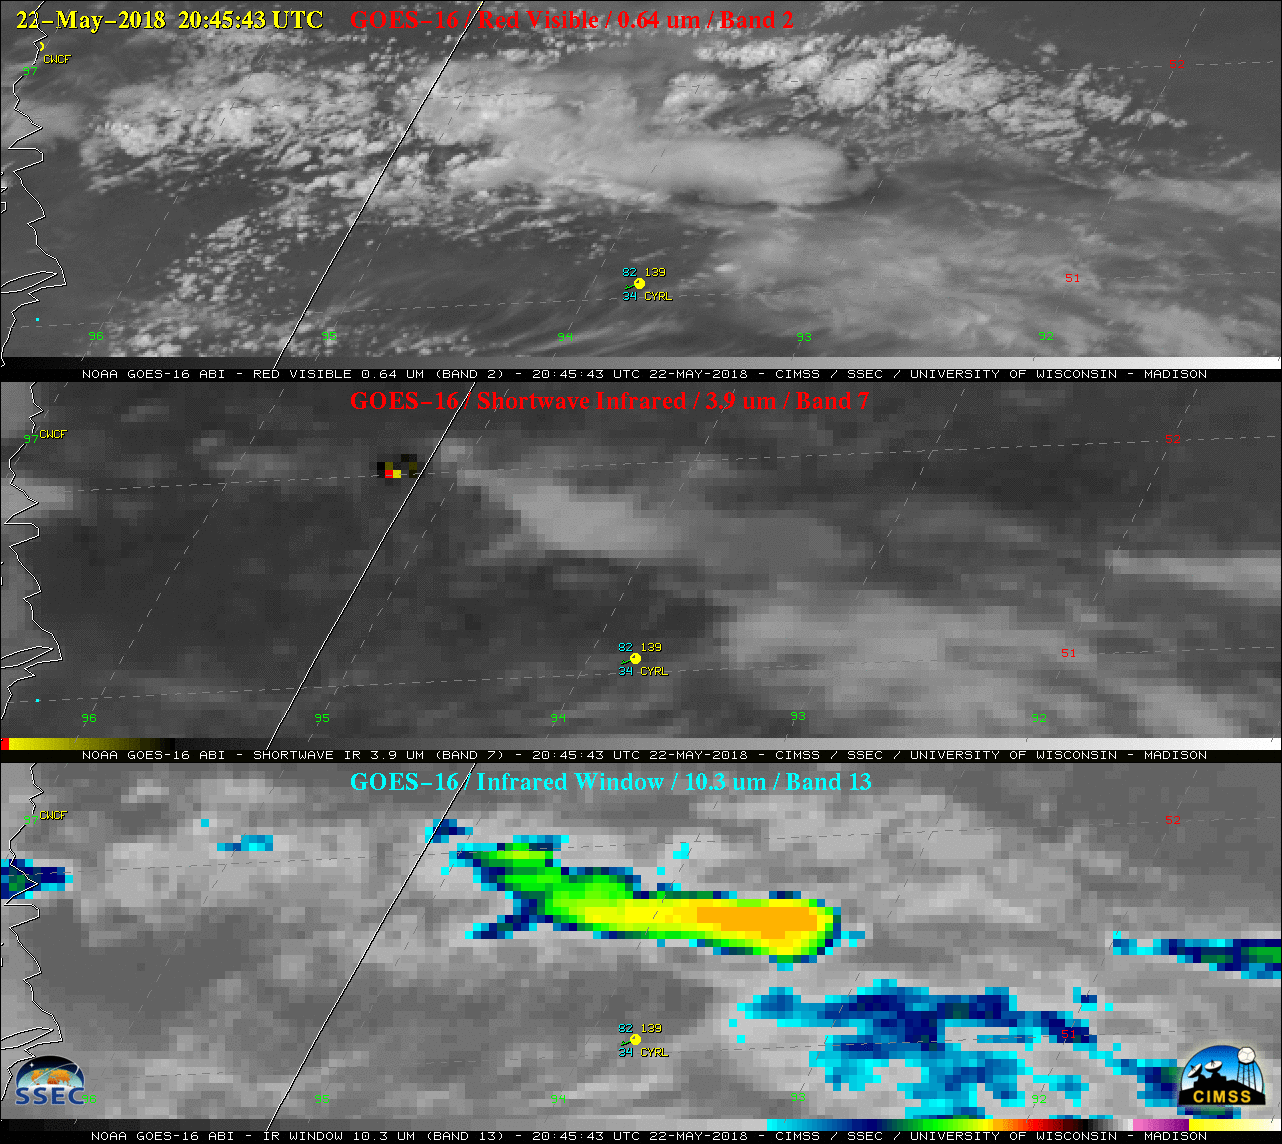 GOES-16 “Red” Visible (0.64 µm, top), Shortwave Infrared (3.9 µm, center) and “Clean” Infrared Window (10.3 µm, bottom) images, with hourly plots of surface reports [click to play MP4 animation]